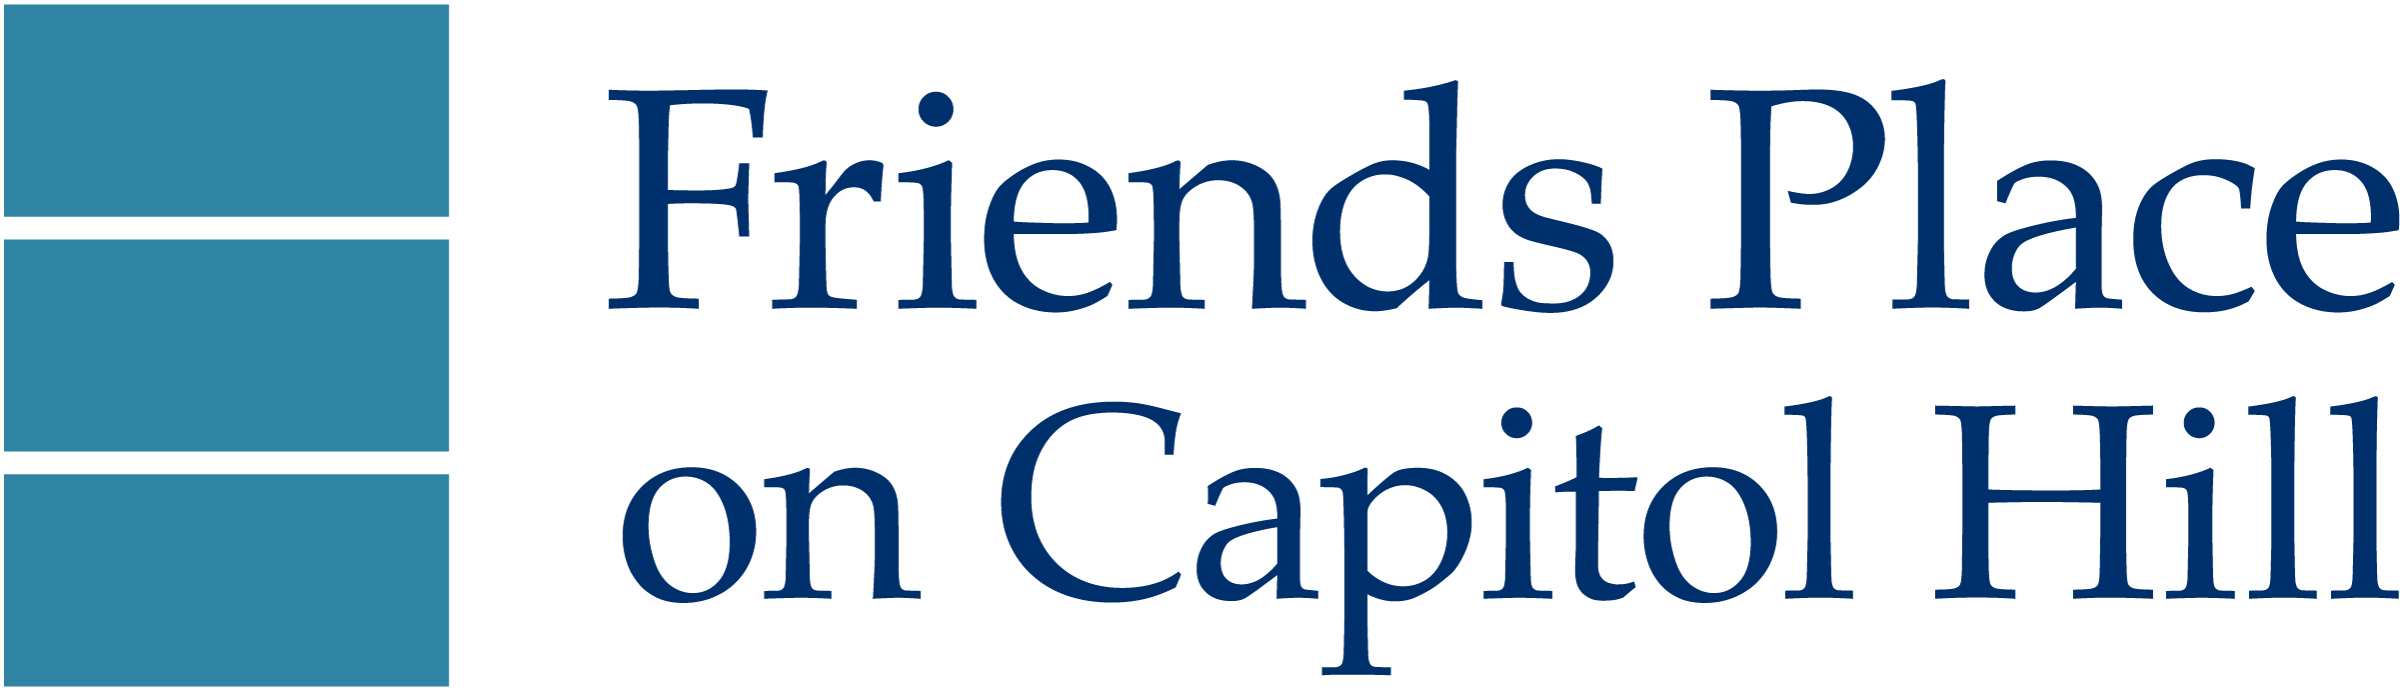 Friends Place on Capitol Hill logo